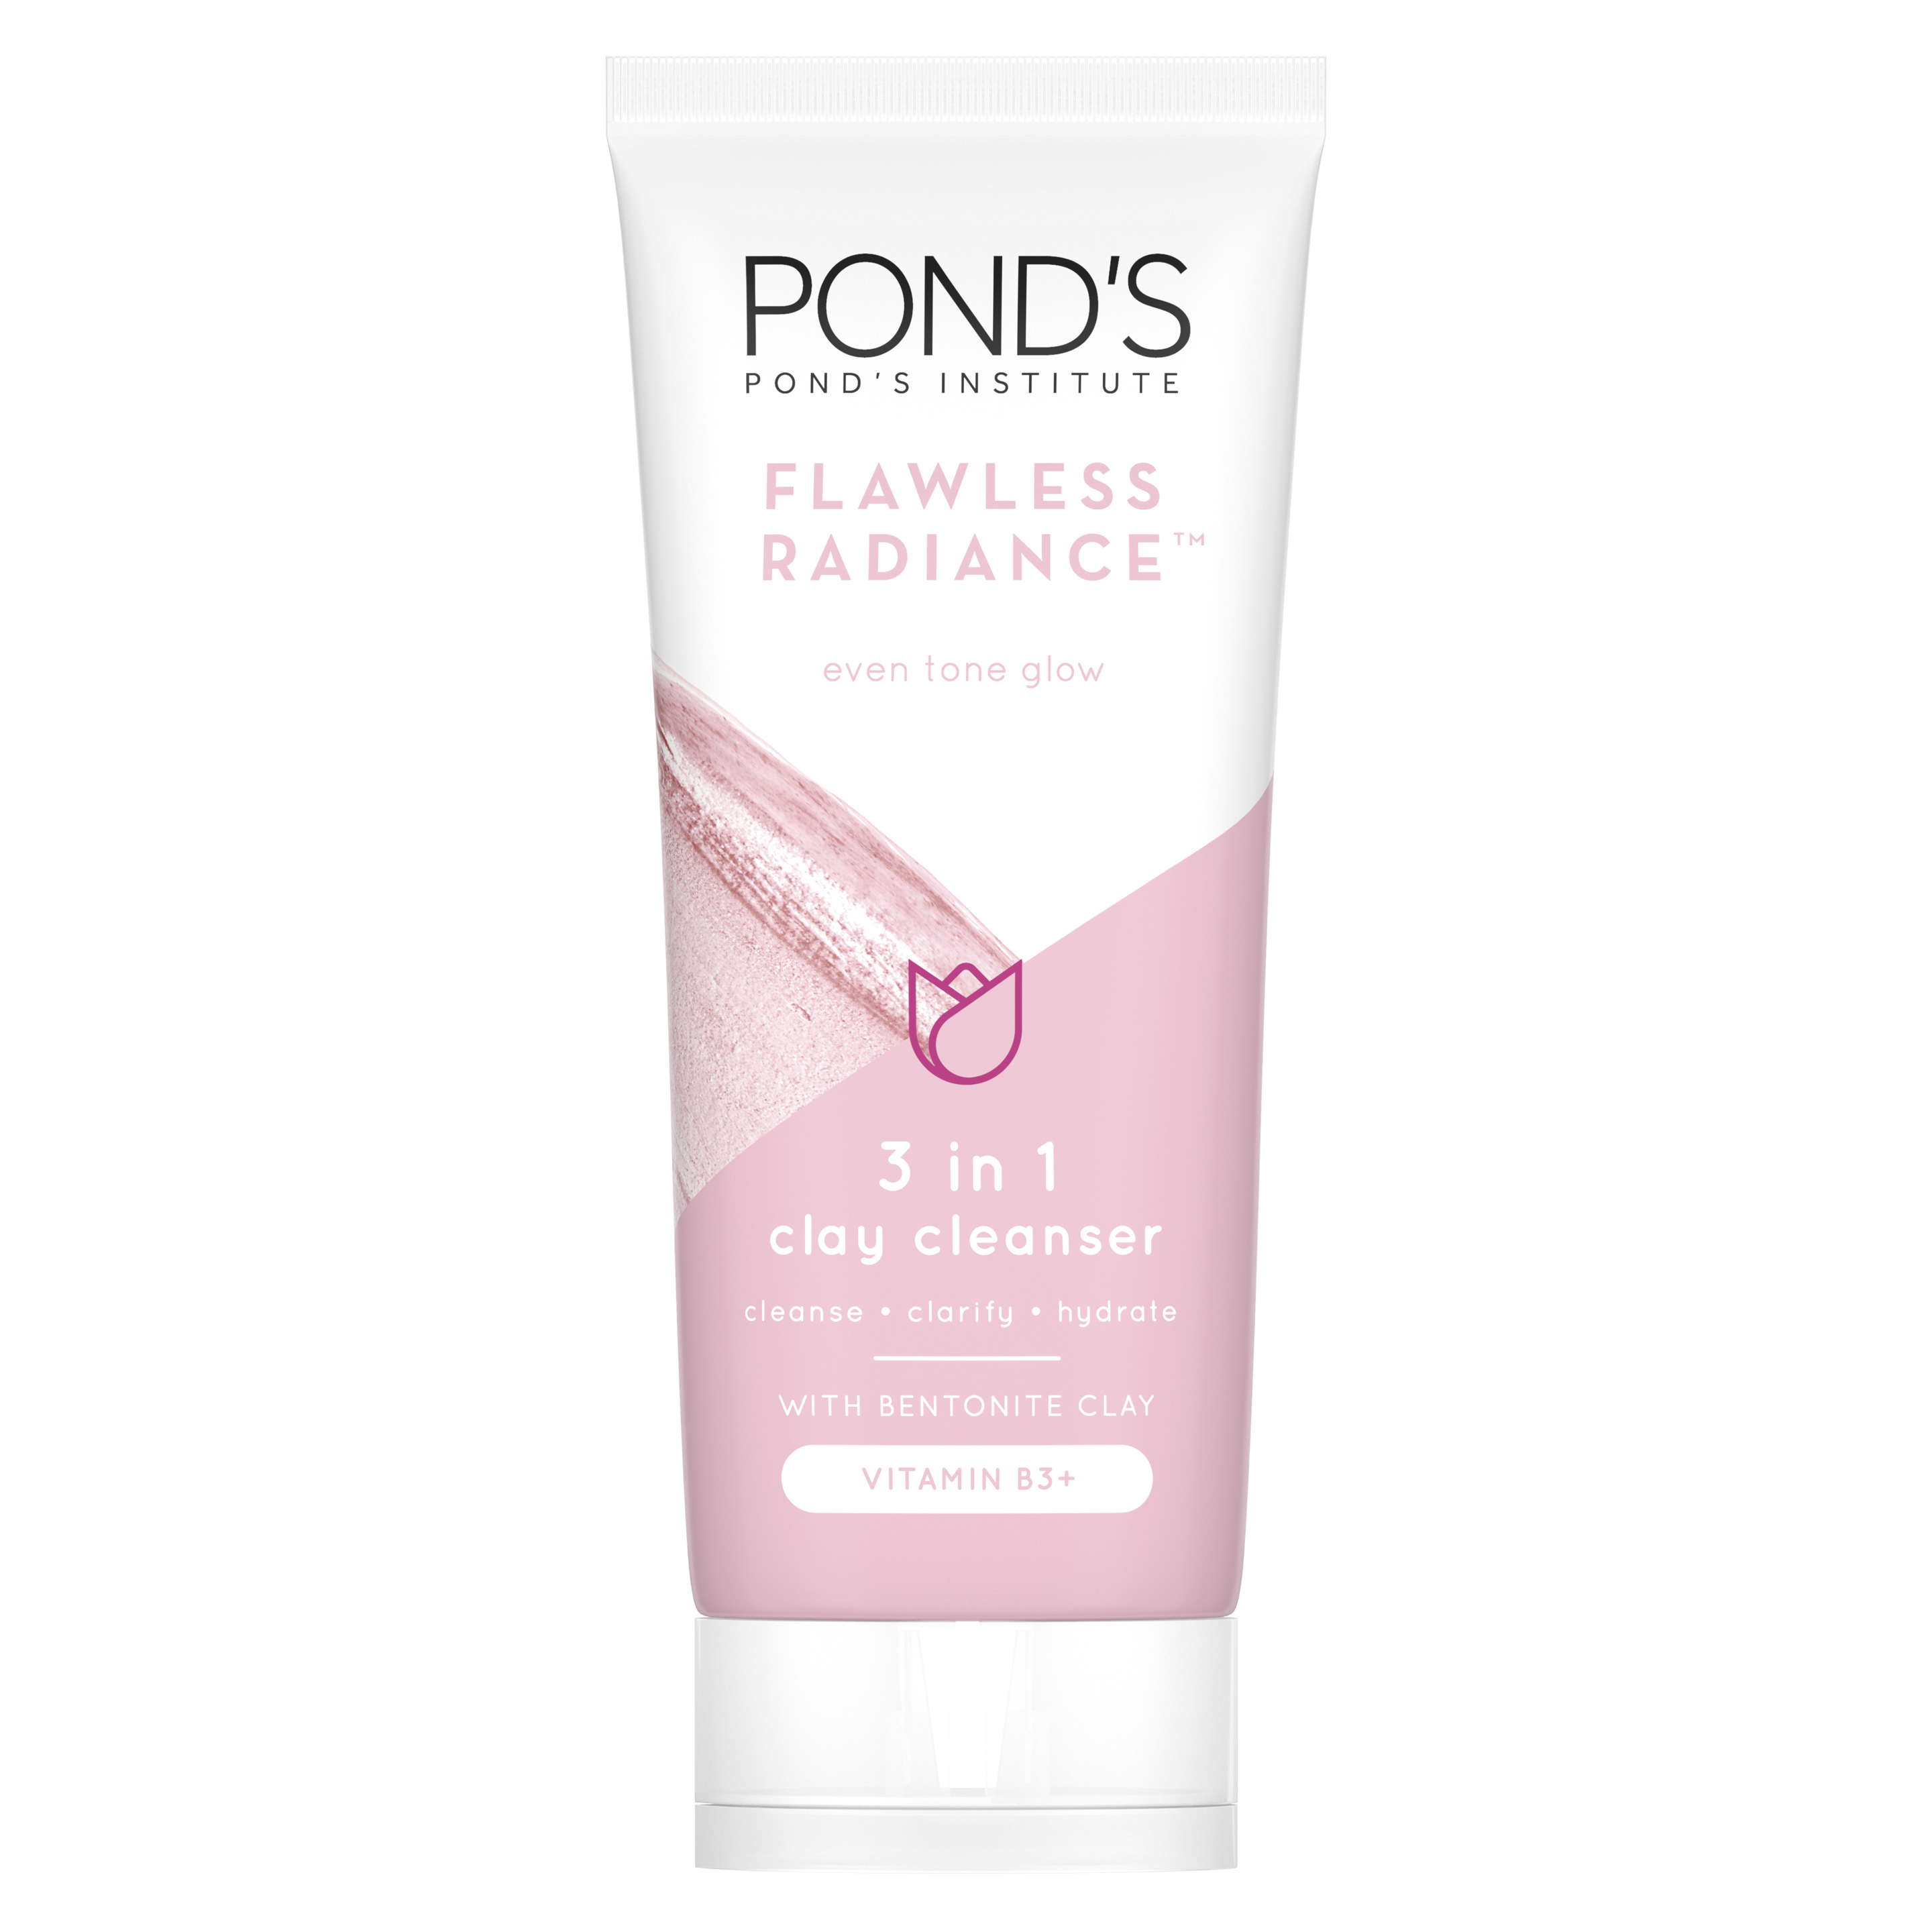 POND'S Flawless Radiance Mineral Clay Cleanser